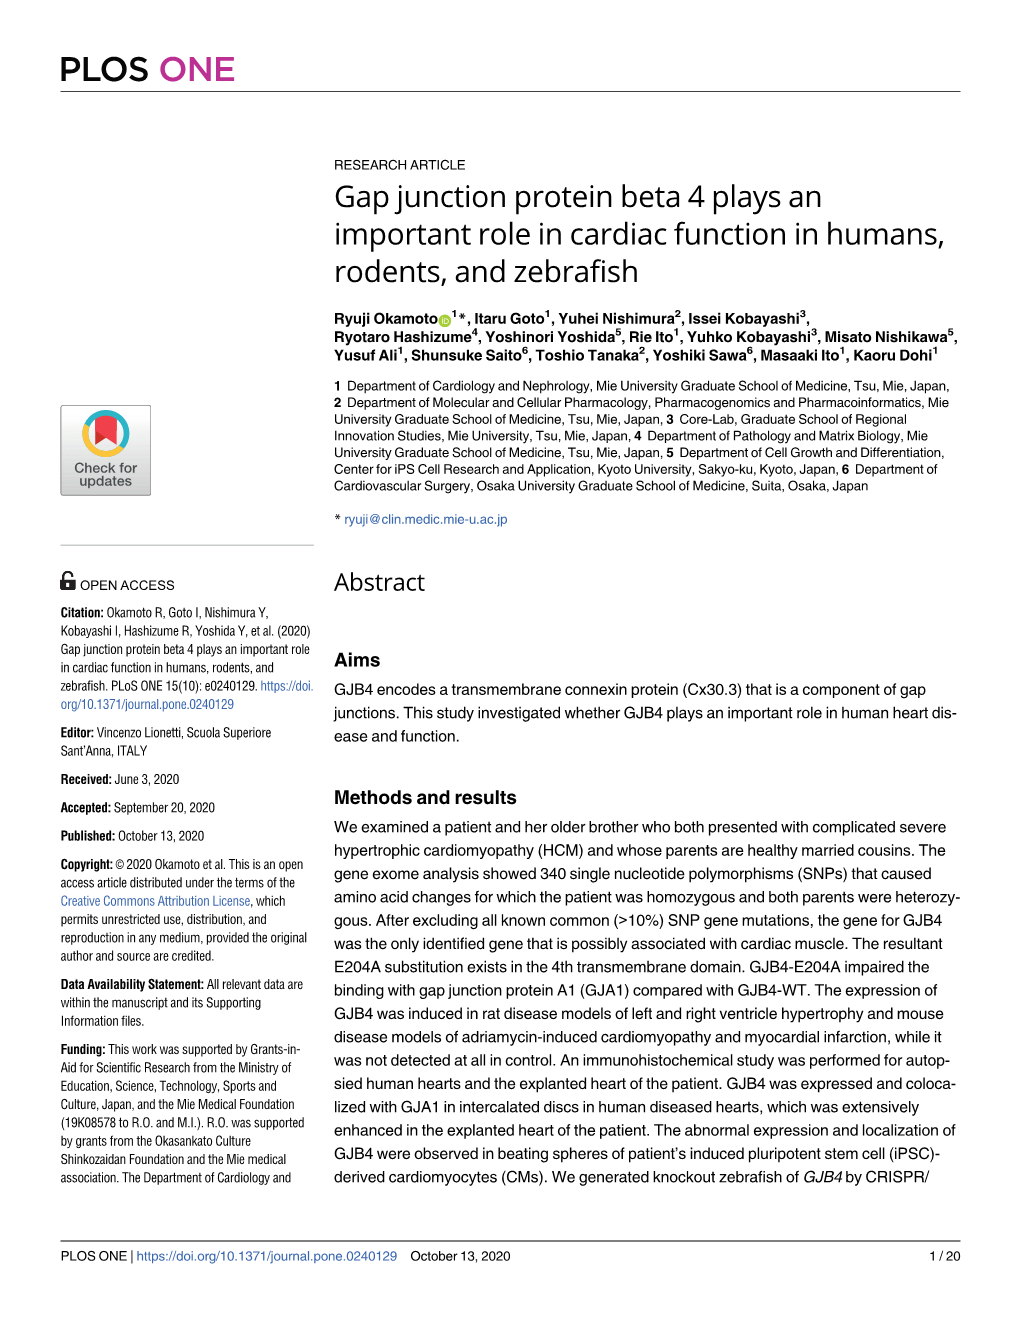 Gap Junction Protein Beta 4 Plays an Important Role in Cardiac Function in Humans, Rodents, and Zebrafish